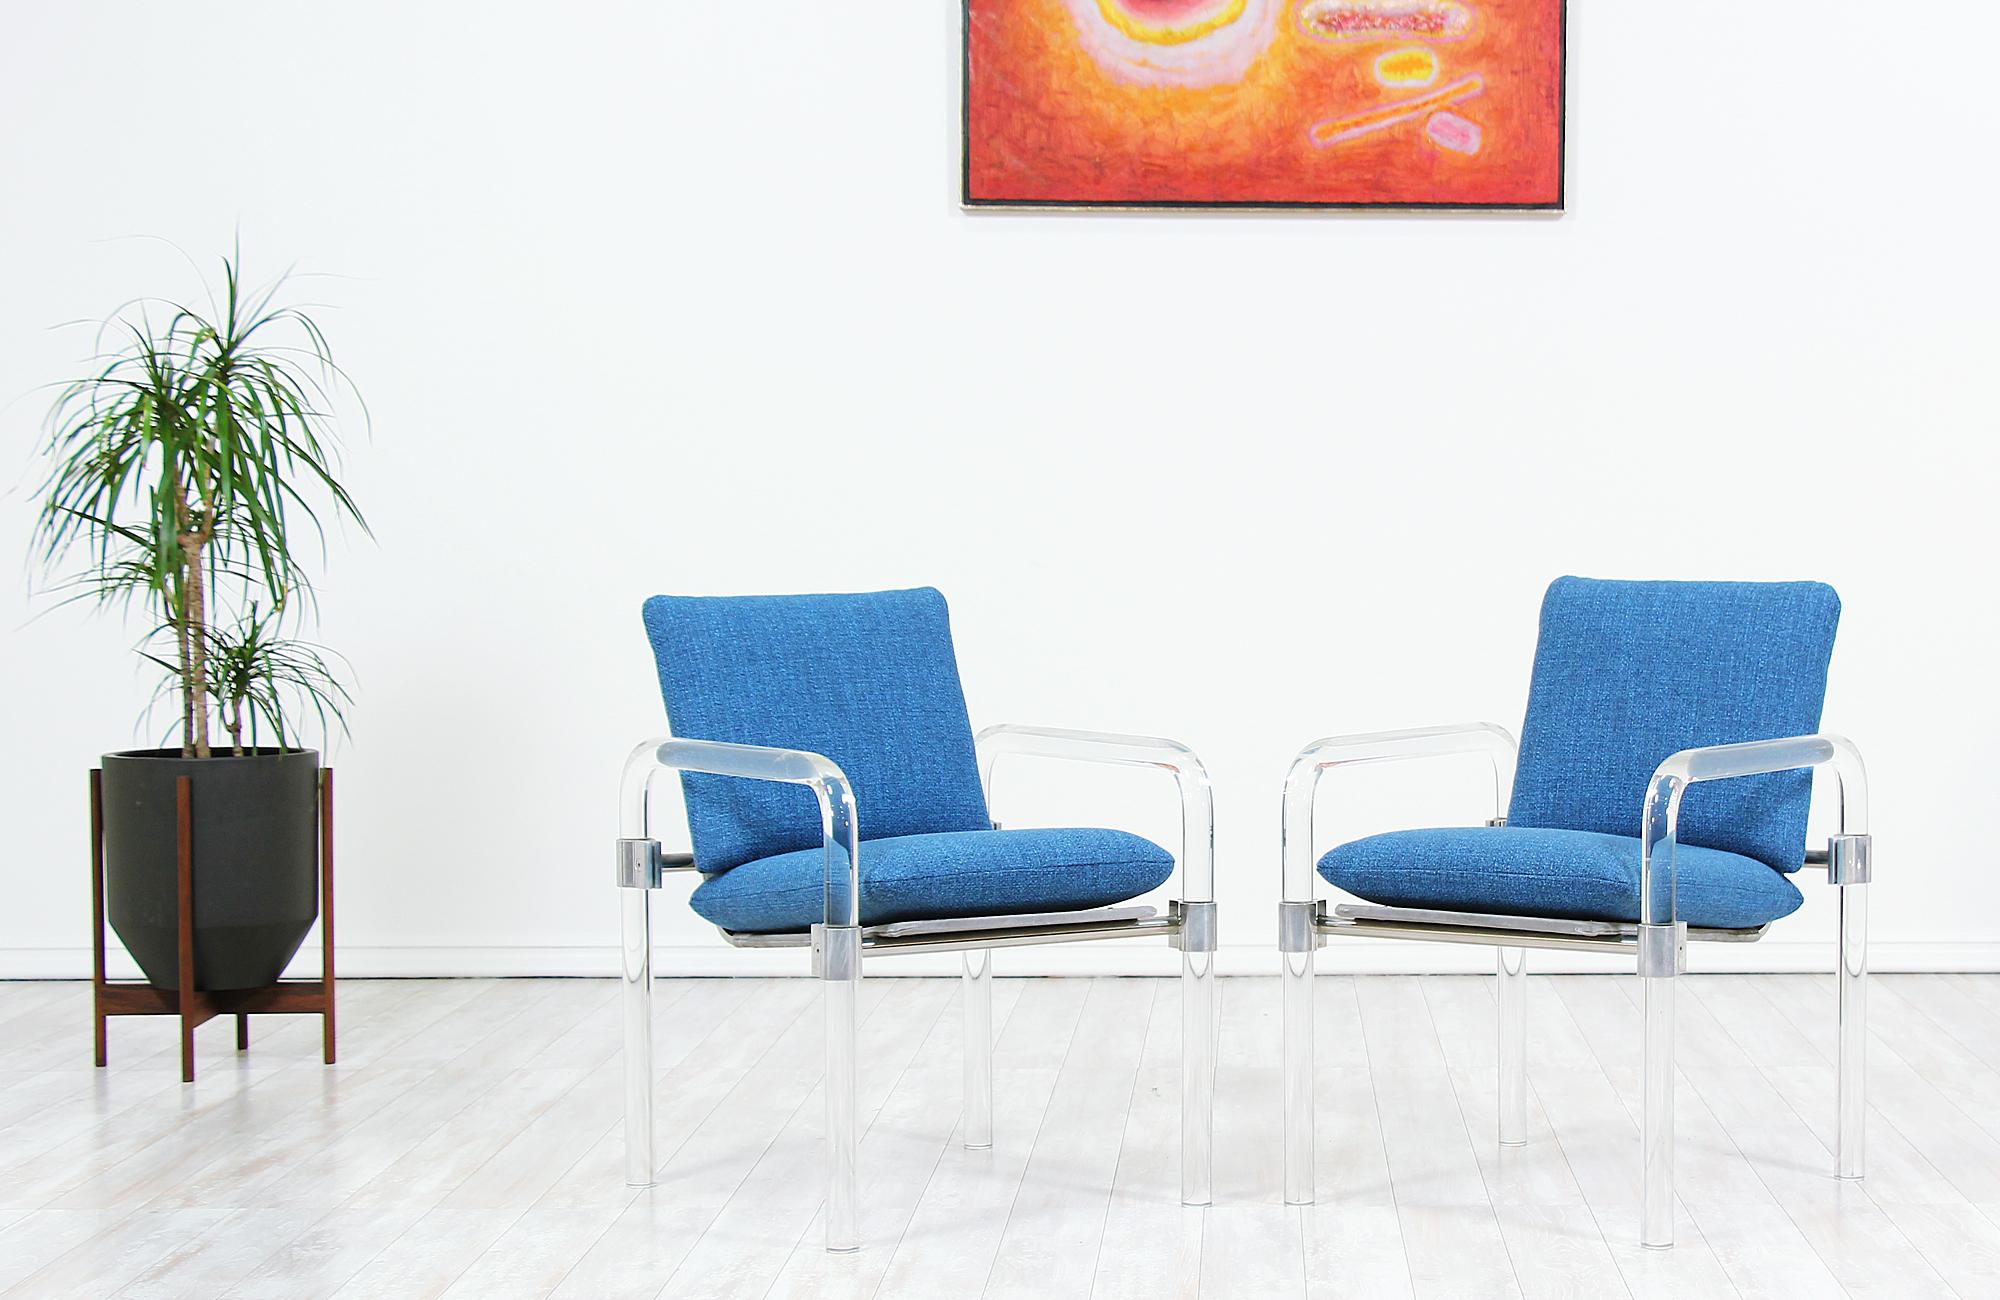 Pair of iconic armchairs designed by Jeff Messerschmidt manufactured by Jeff Messerschmidt Studio in the United States, circa 1980s. This unique design belongs to the Pipeline Series II and features a Lucite frame with steel hardware. The clean,